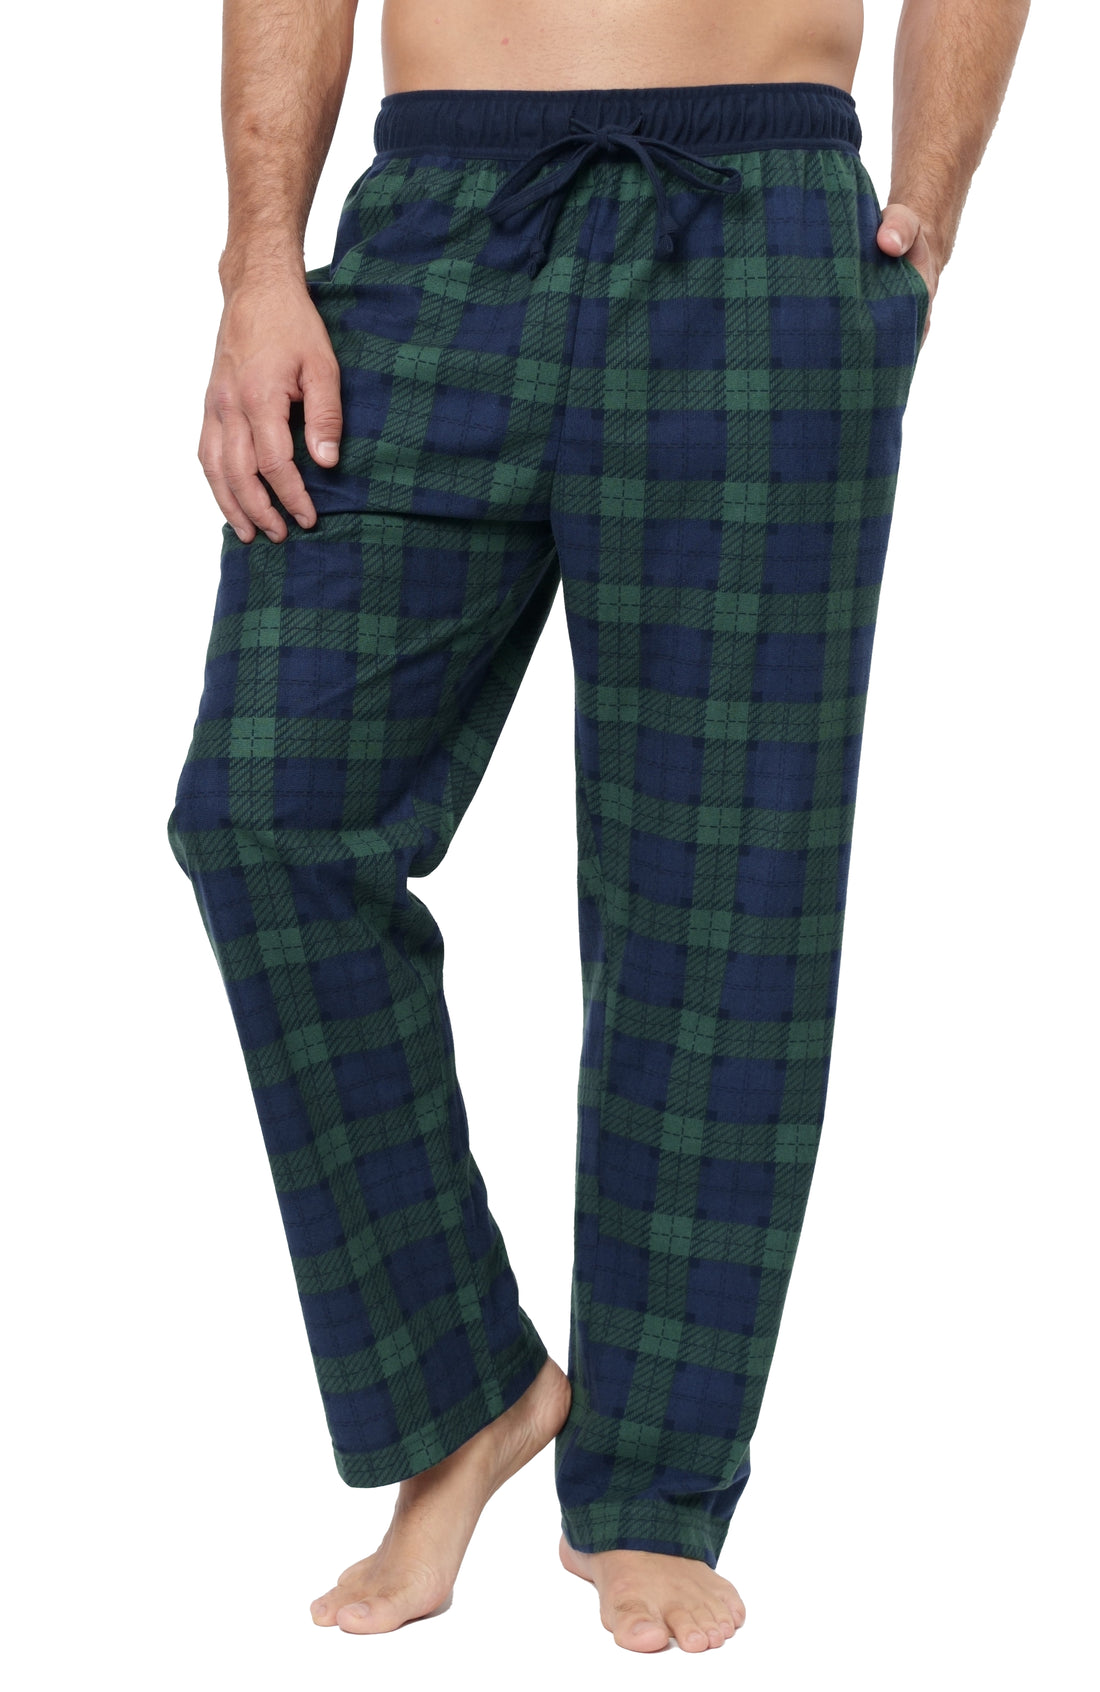 MICRO FLEECE PLAID LOUNGE PANT - ROLLED PACKAGING